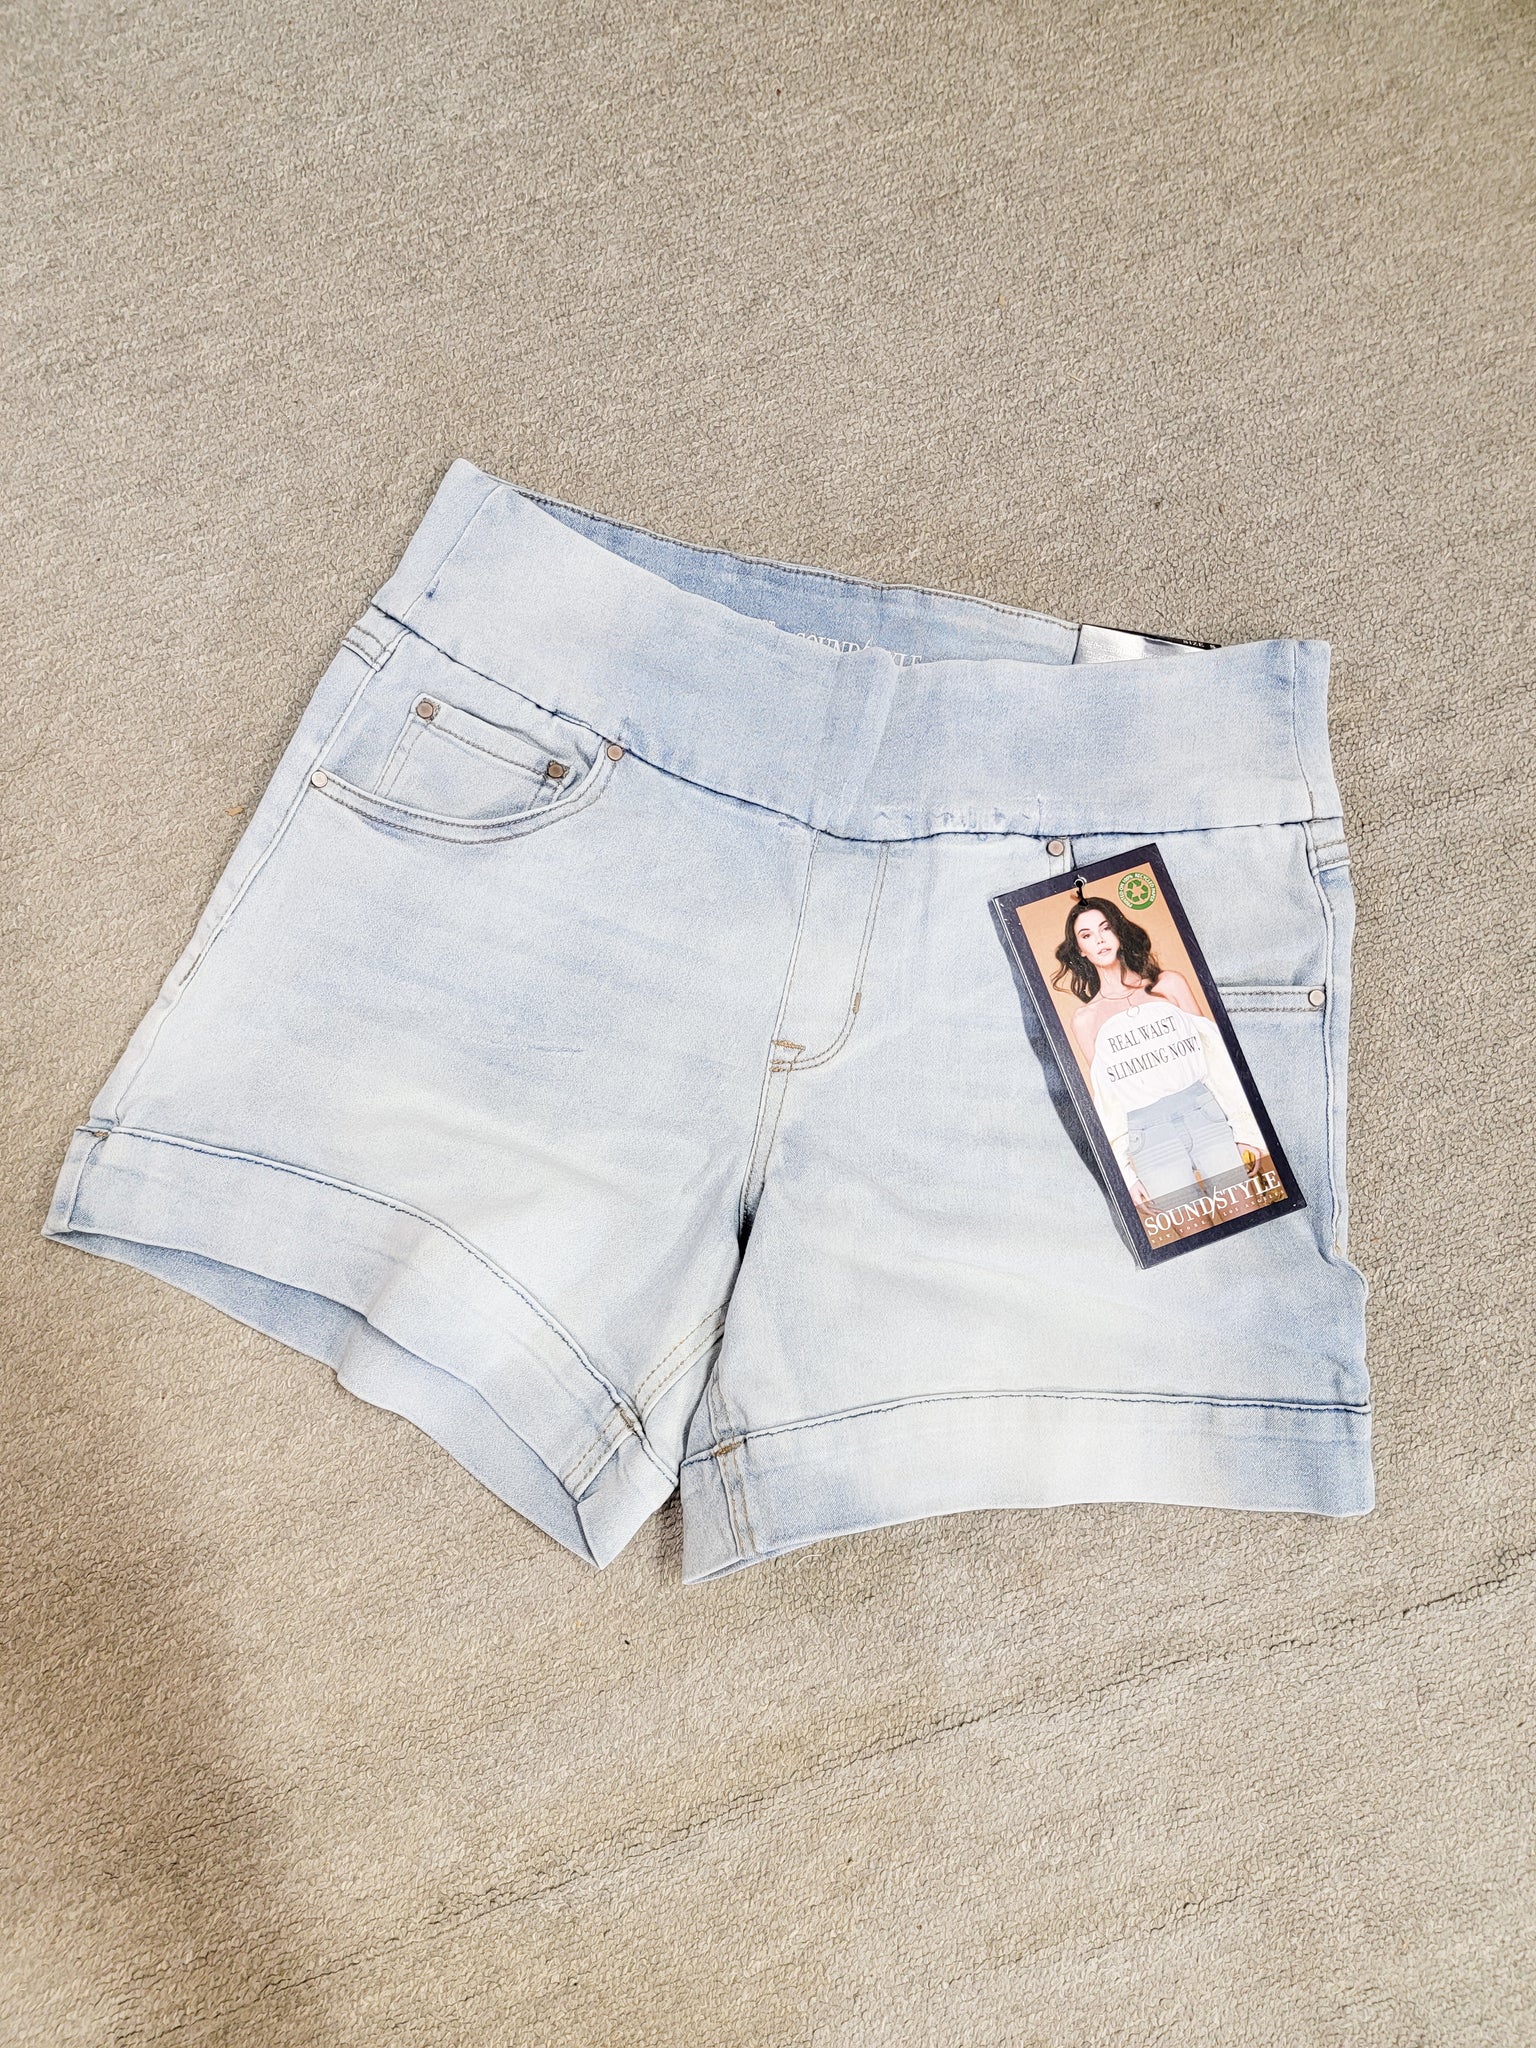 High Low Waist Drawstring Shorts Denim High Waist With Button Closure,  Slimming Empire Cotton Pants, Sexy Skinny Design, Pockets Wholesale 210809  From Bai05, $18.21 | DHgate.Com